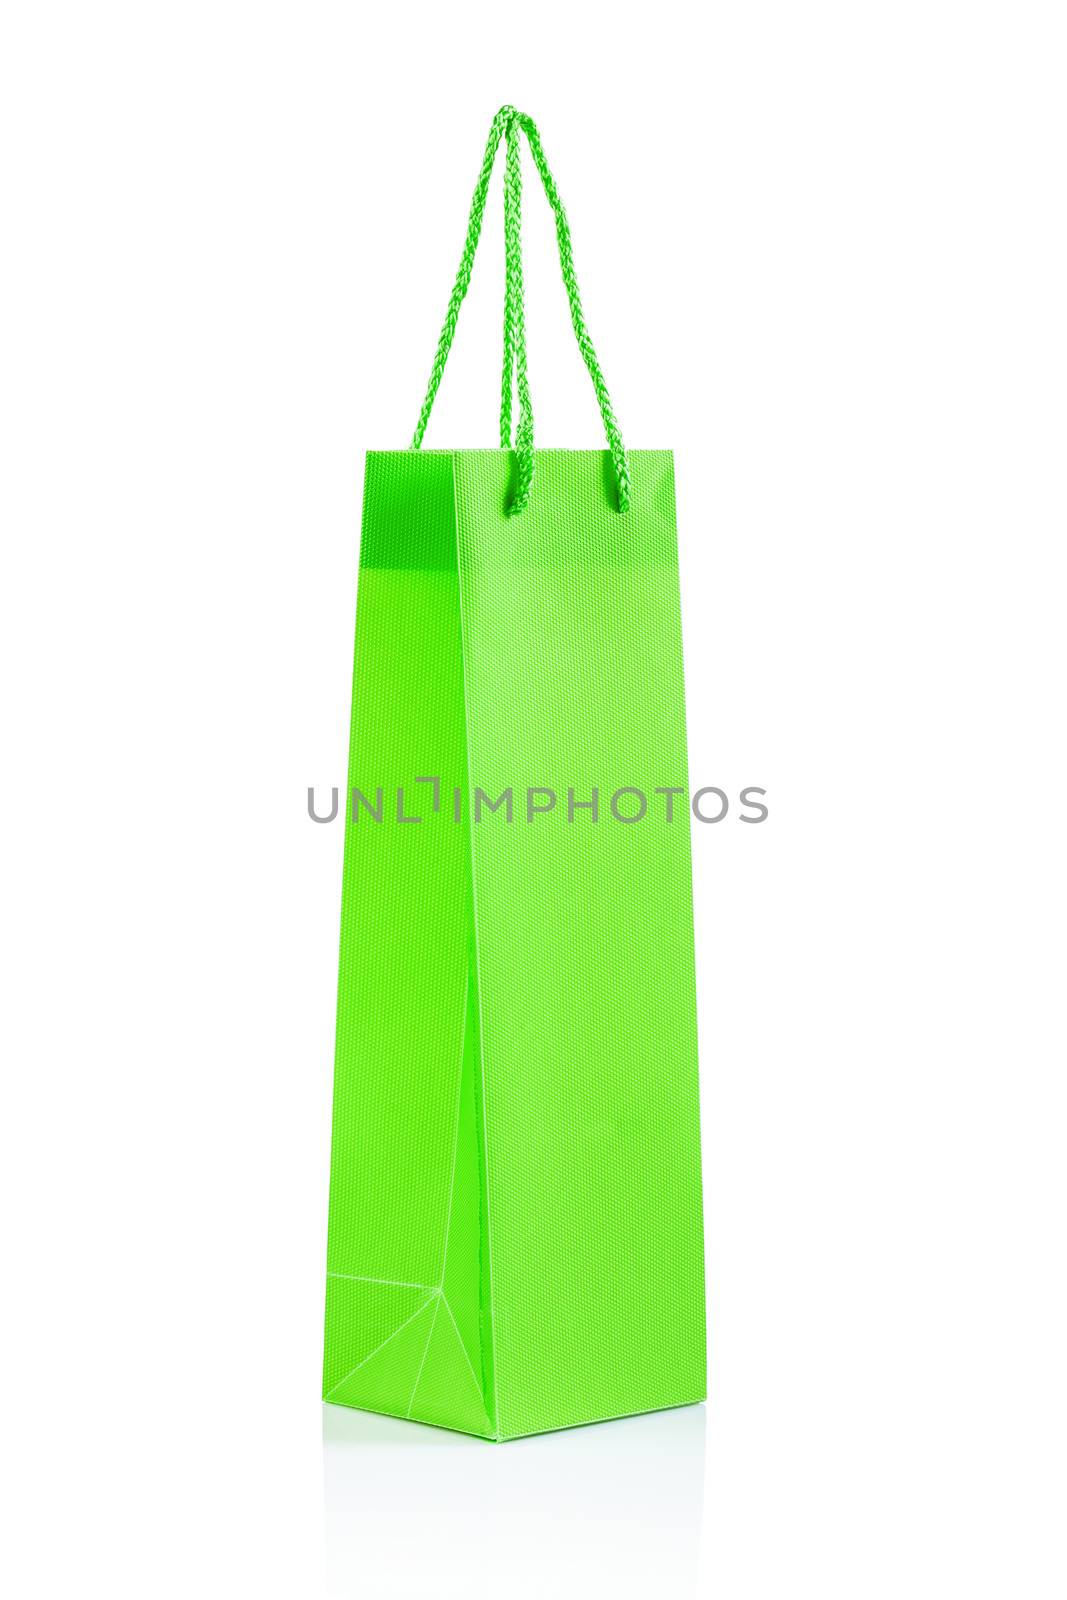 a single green paper bag isolated